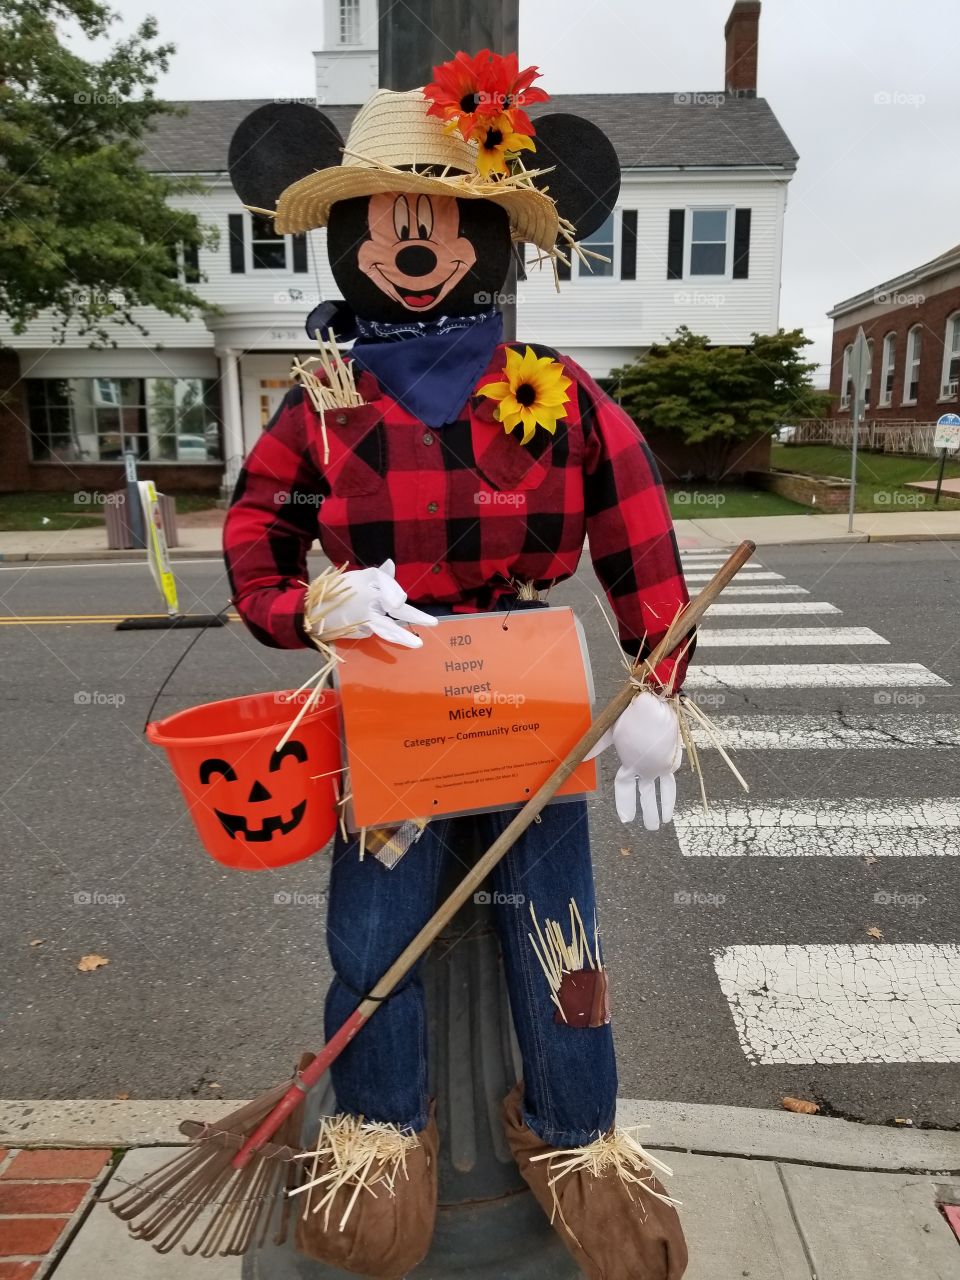 Mickey mouse dress like a scarecrow in Tom River in New Jersey